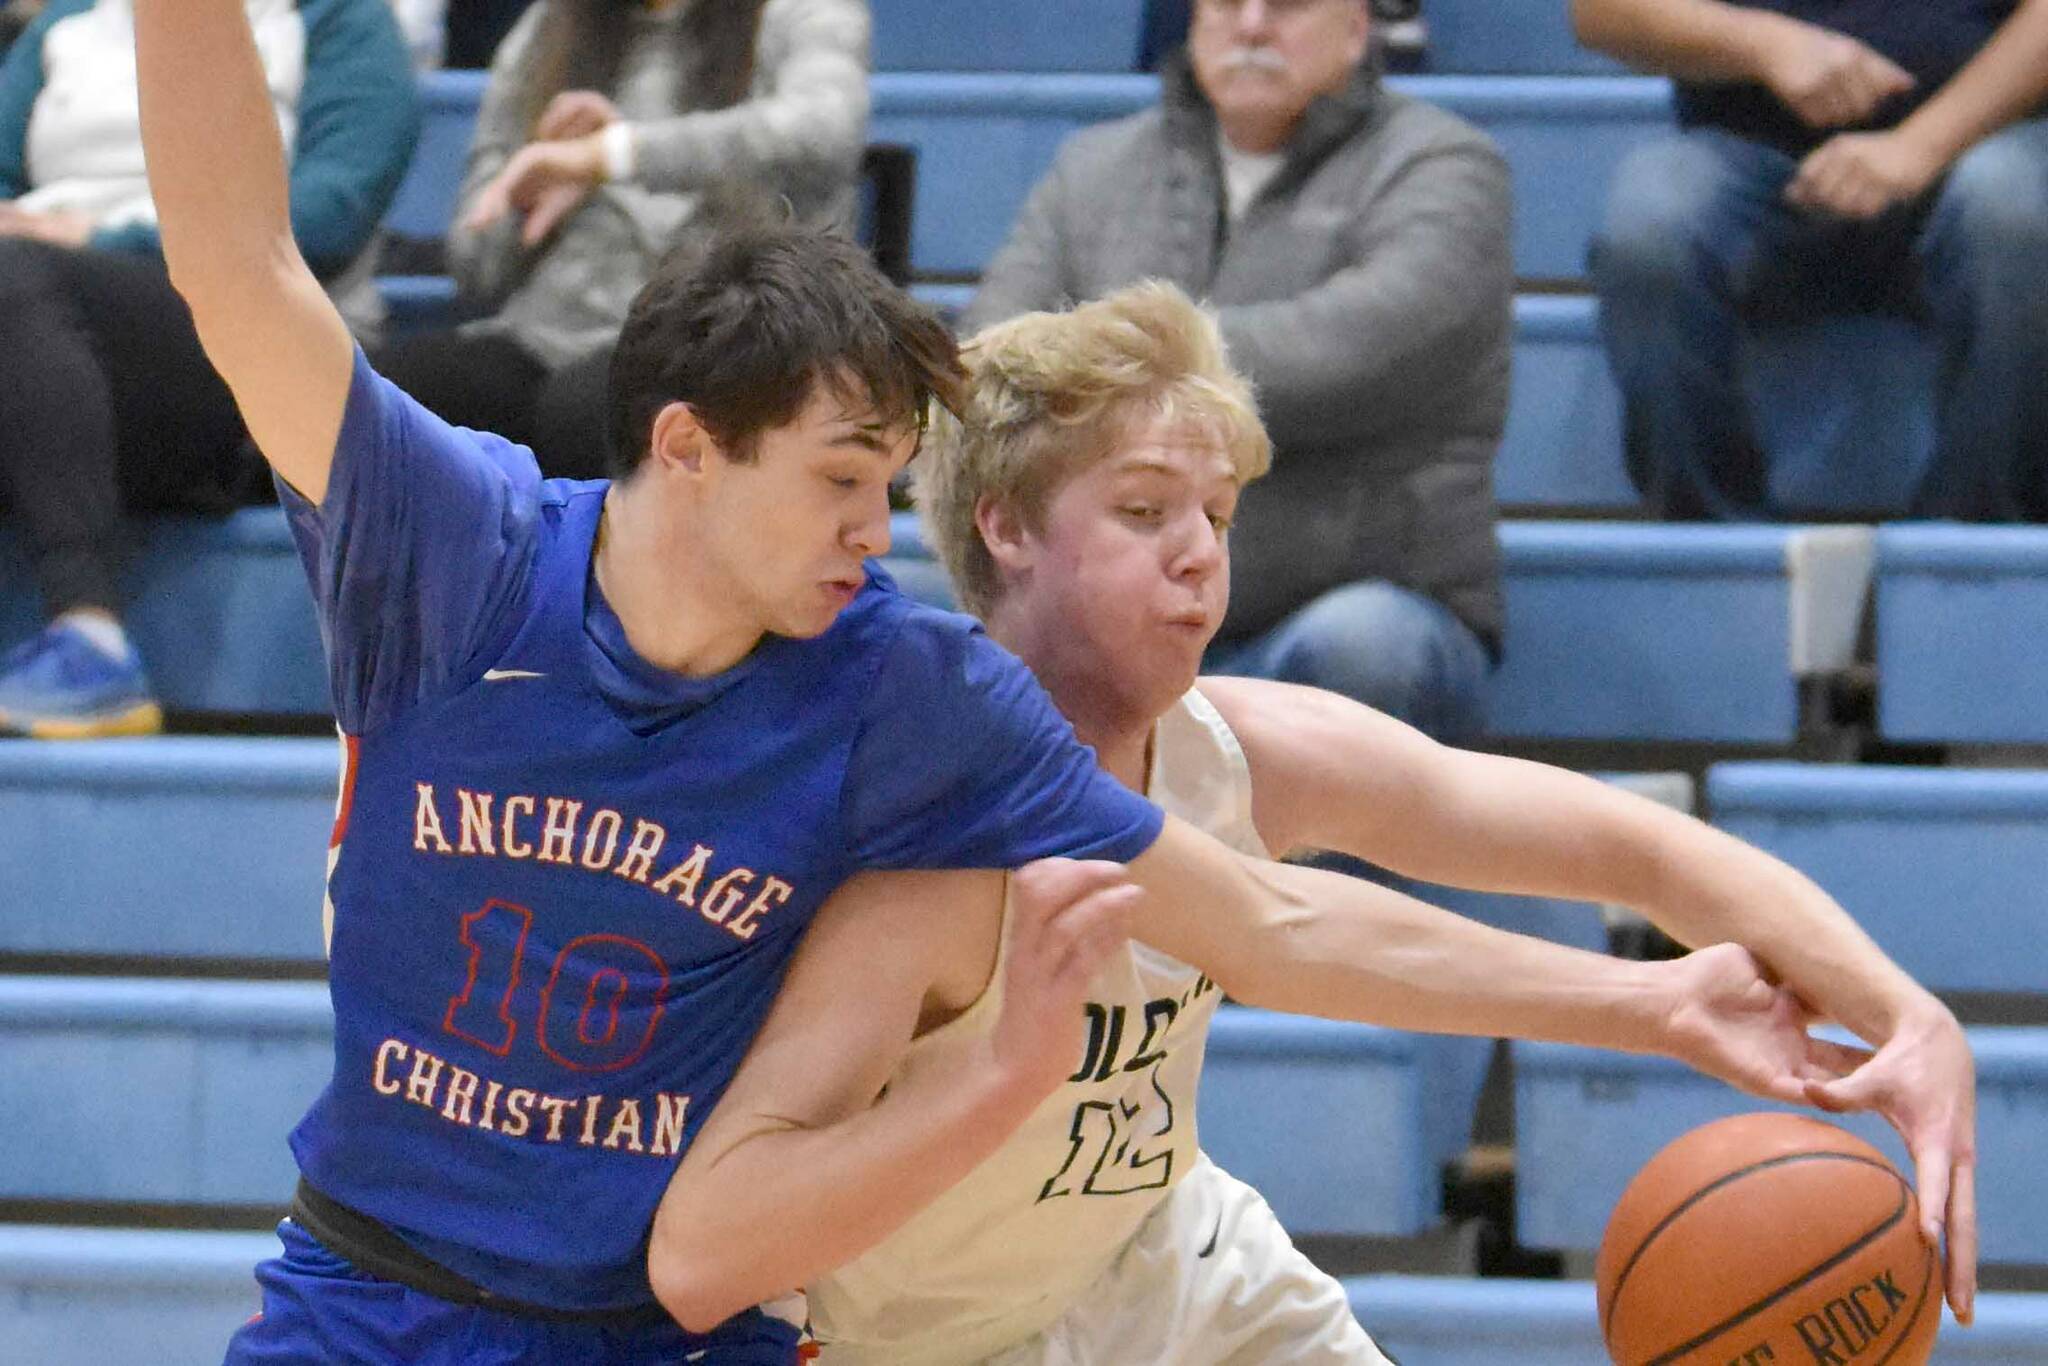 JD McGee of Anchorage Christian Schools knocks the ball away from Soldotna's Jakob Brown on Wednesday, Jan. 25, 2023, at Soldotna High School in Soldotna, Alaska. (Photo by Jeff Helminiak/Peninsula Clarion)